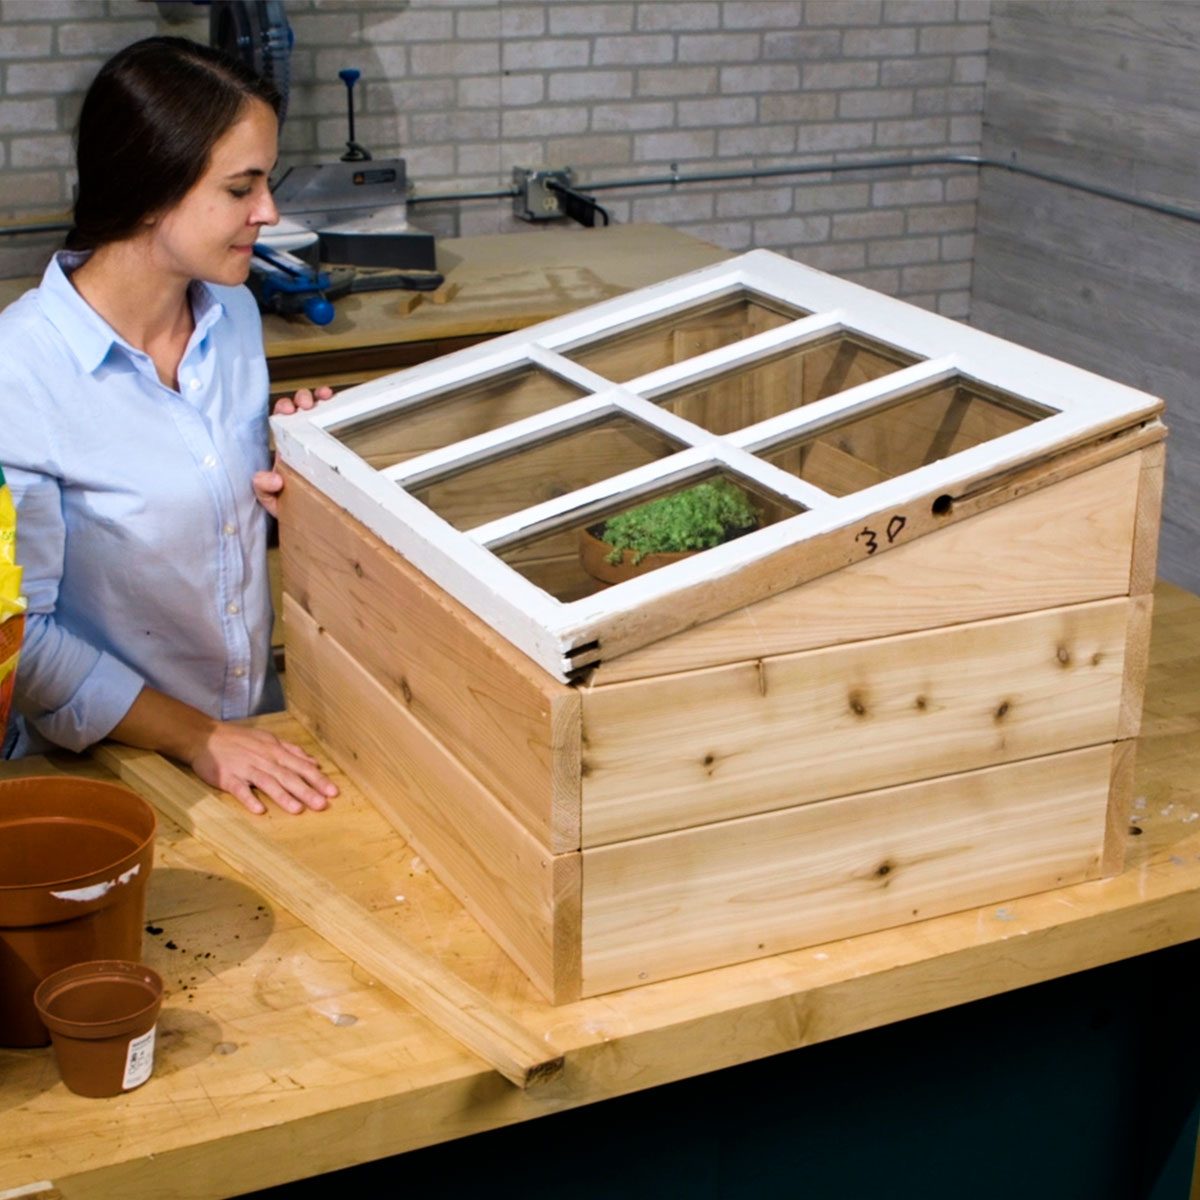 How to Build a Small Greenhouse From Old Windows